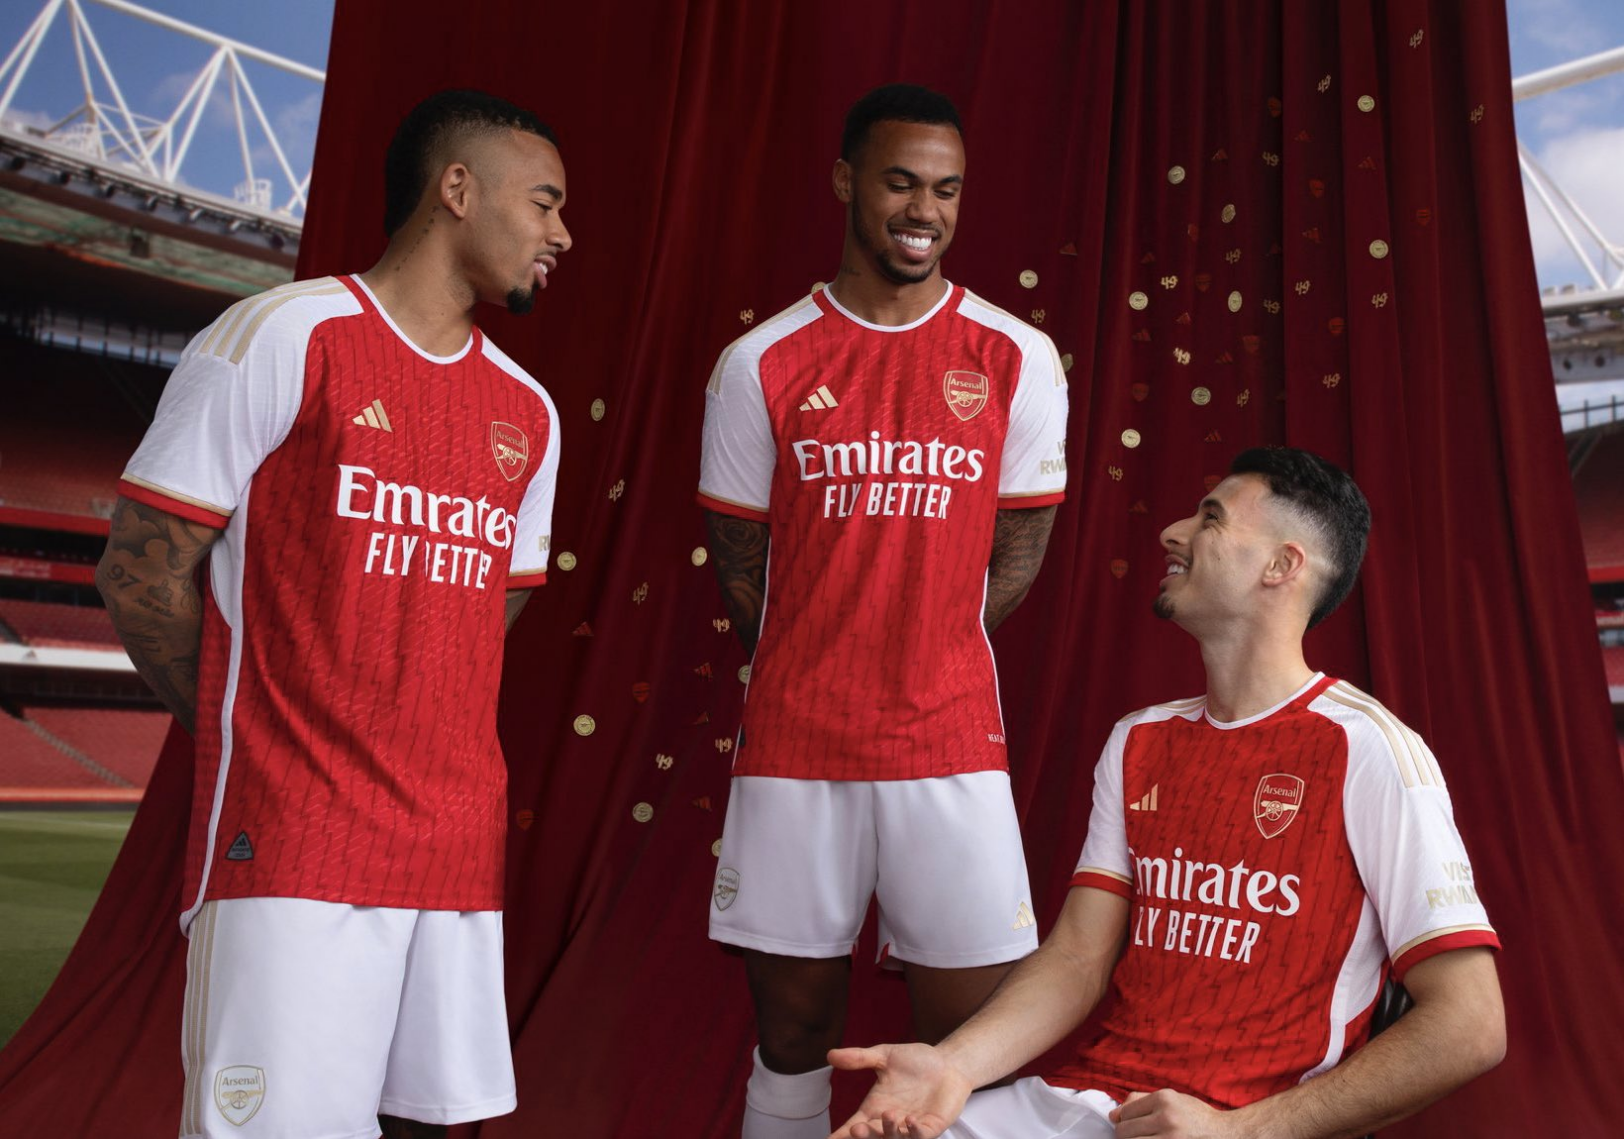 le maillot d'Arsenal